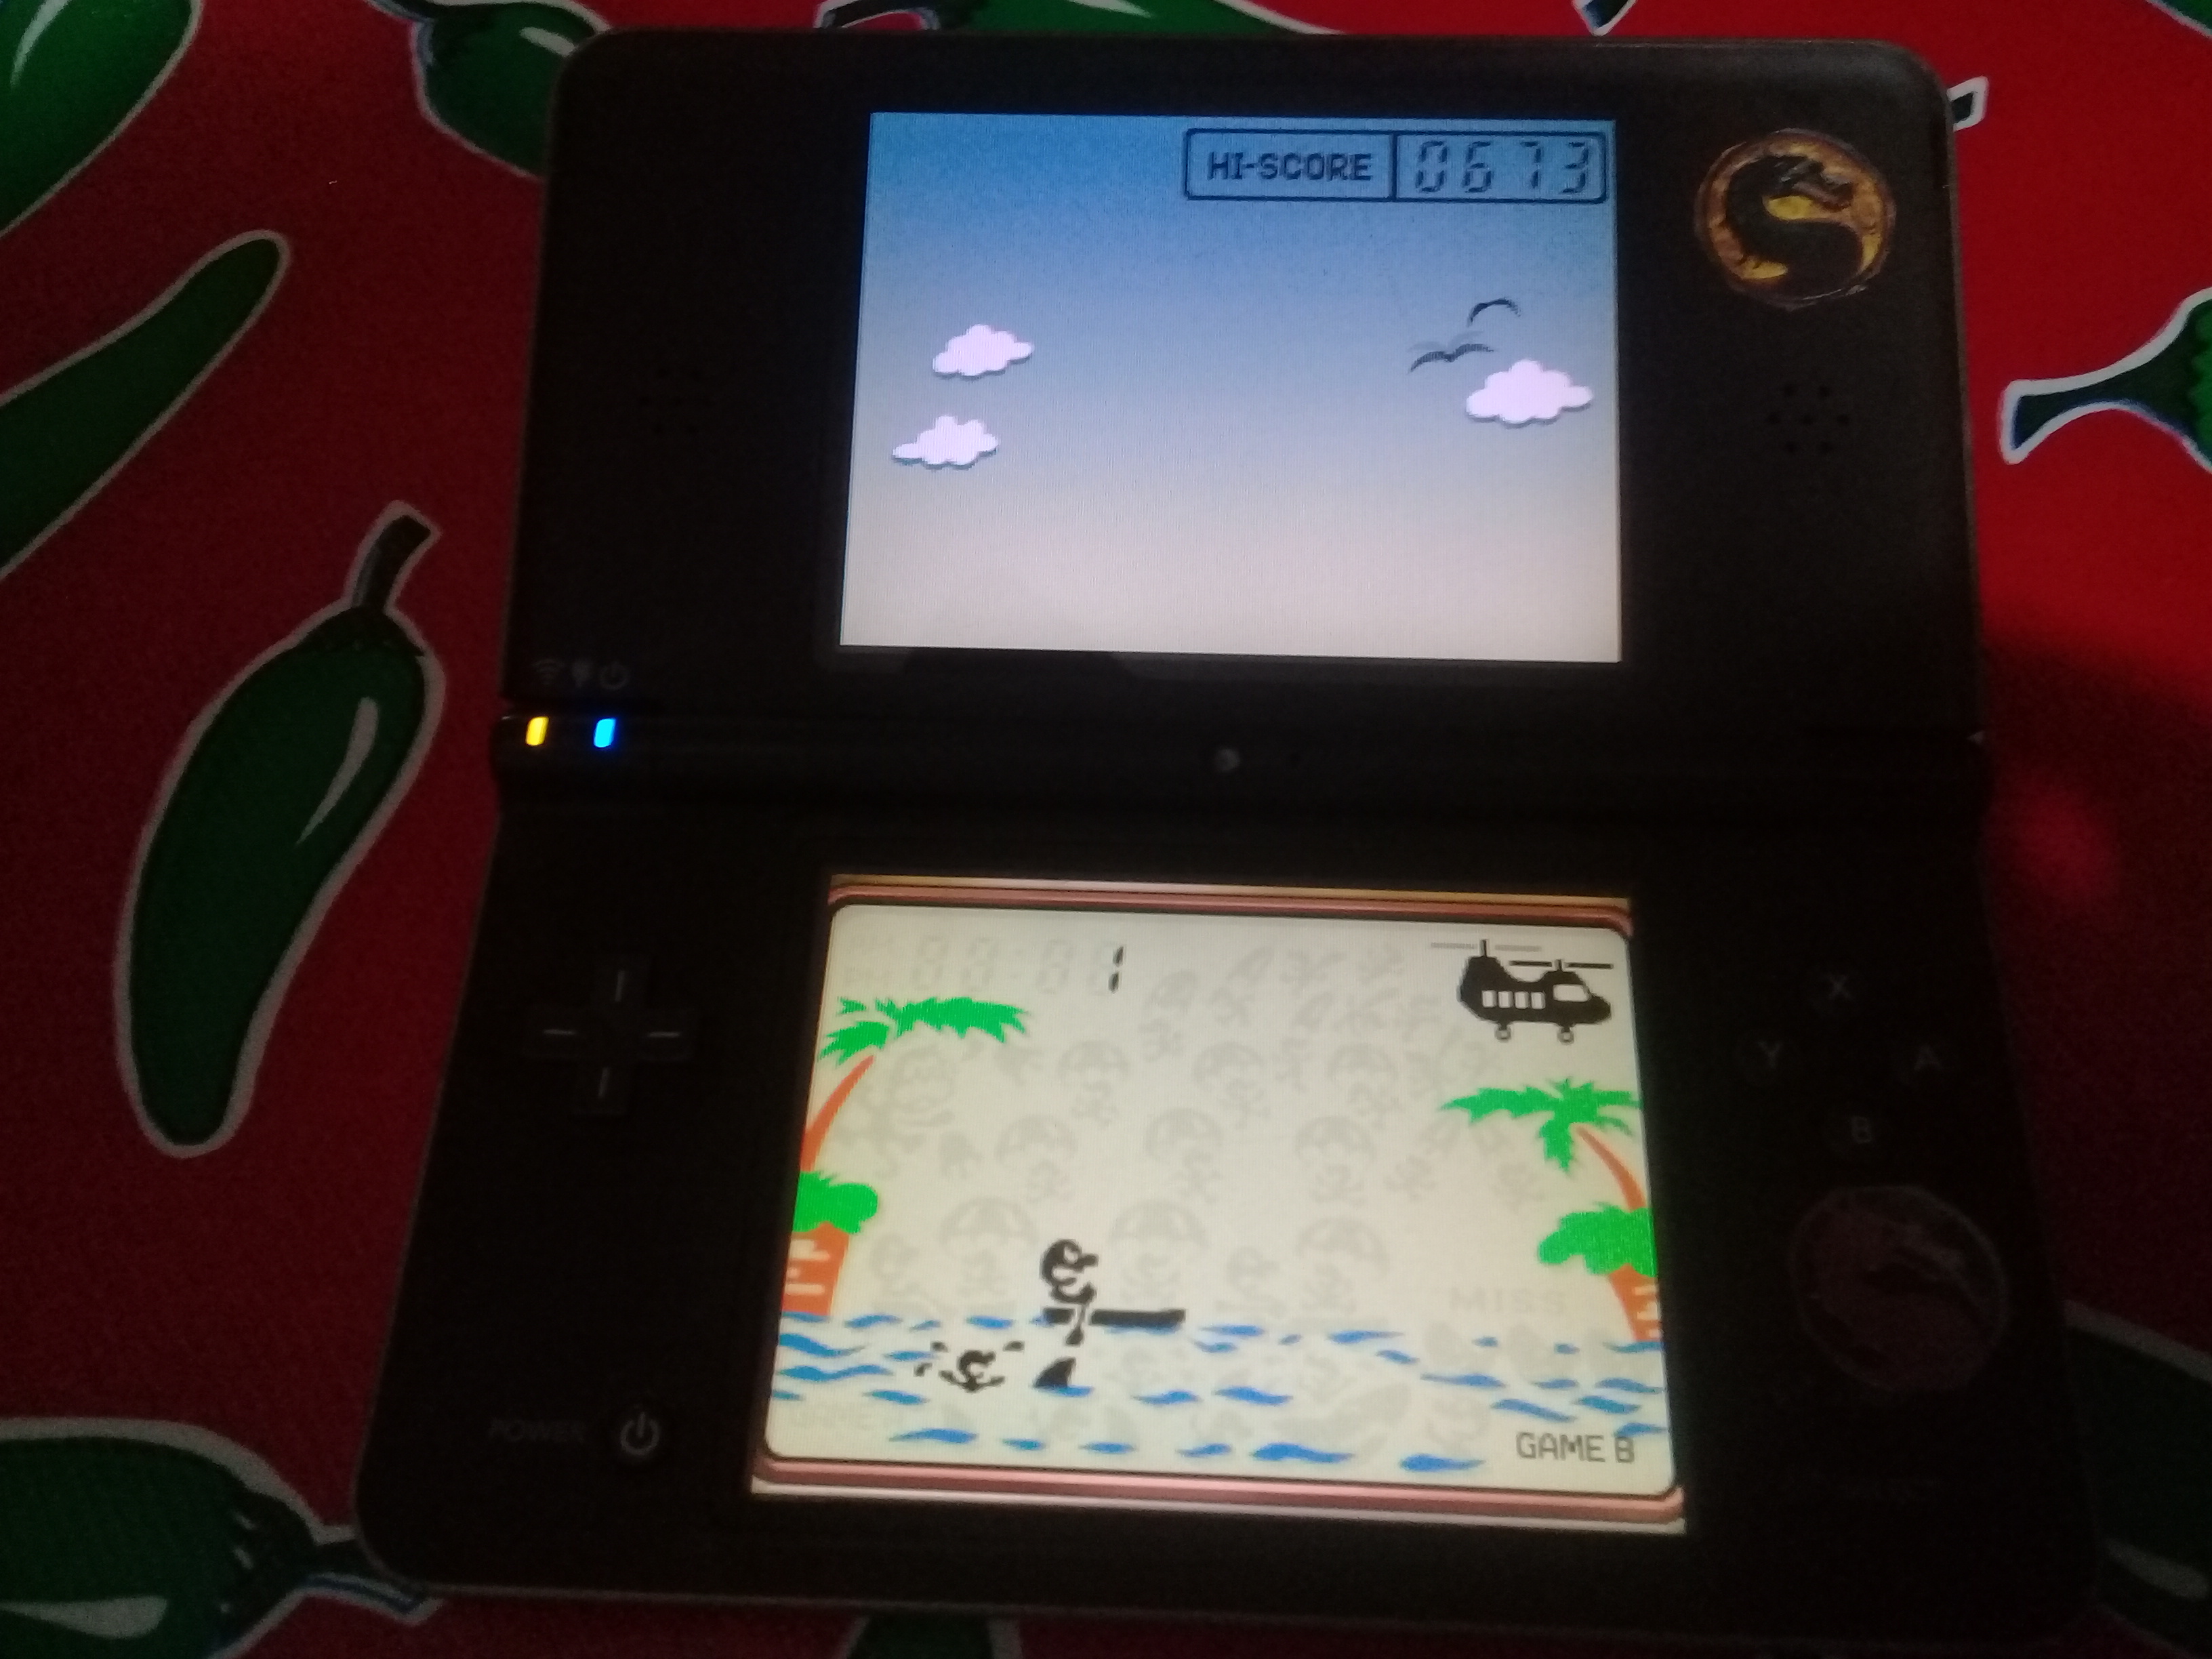 omargeddon: Game & Watch Collection 2: Parachute [Game B] (Nintendo DS) 673 points on 2021-09-23 18:51:03